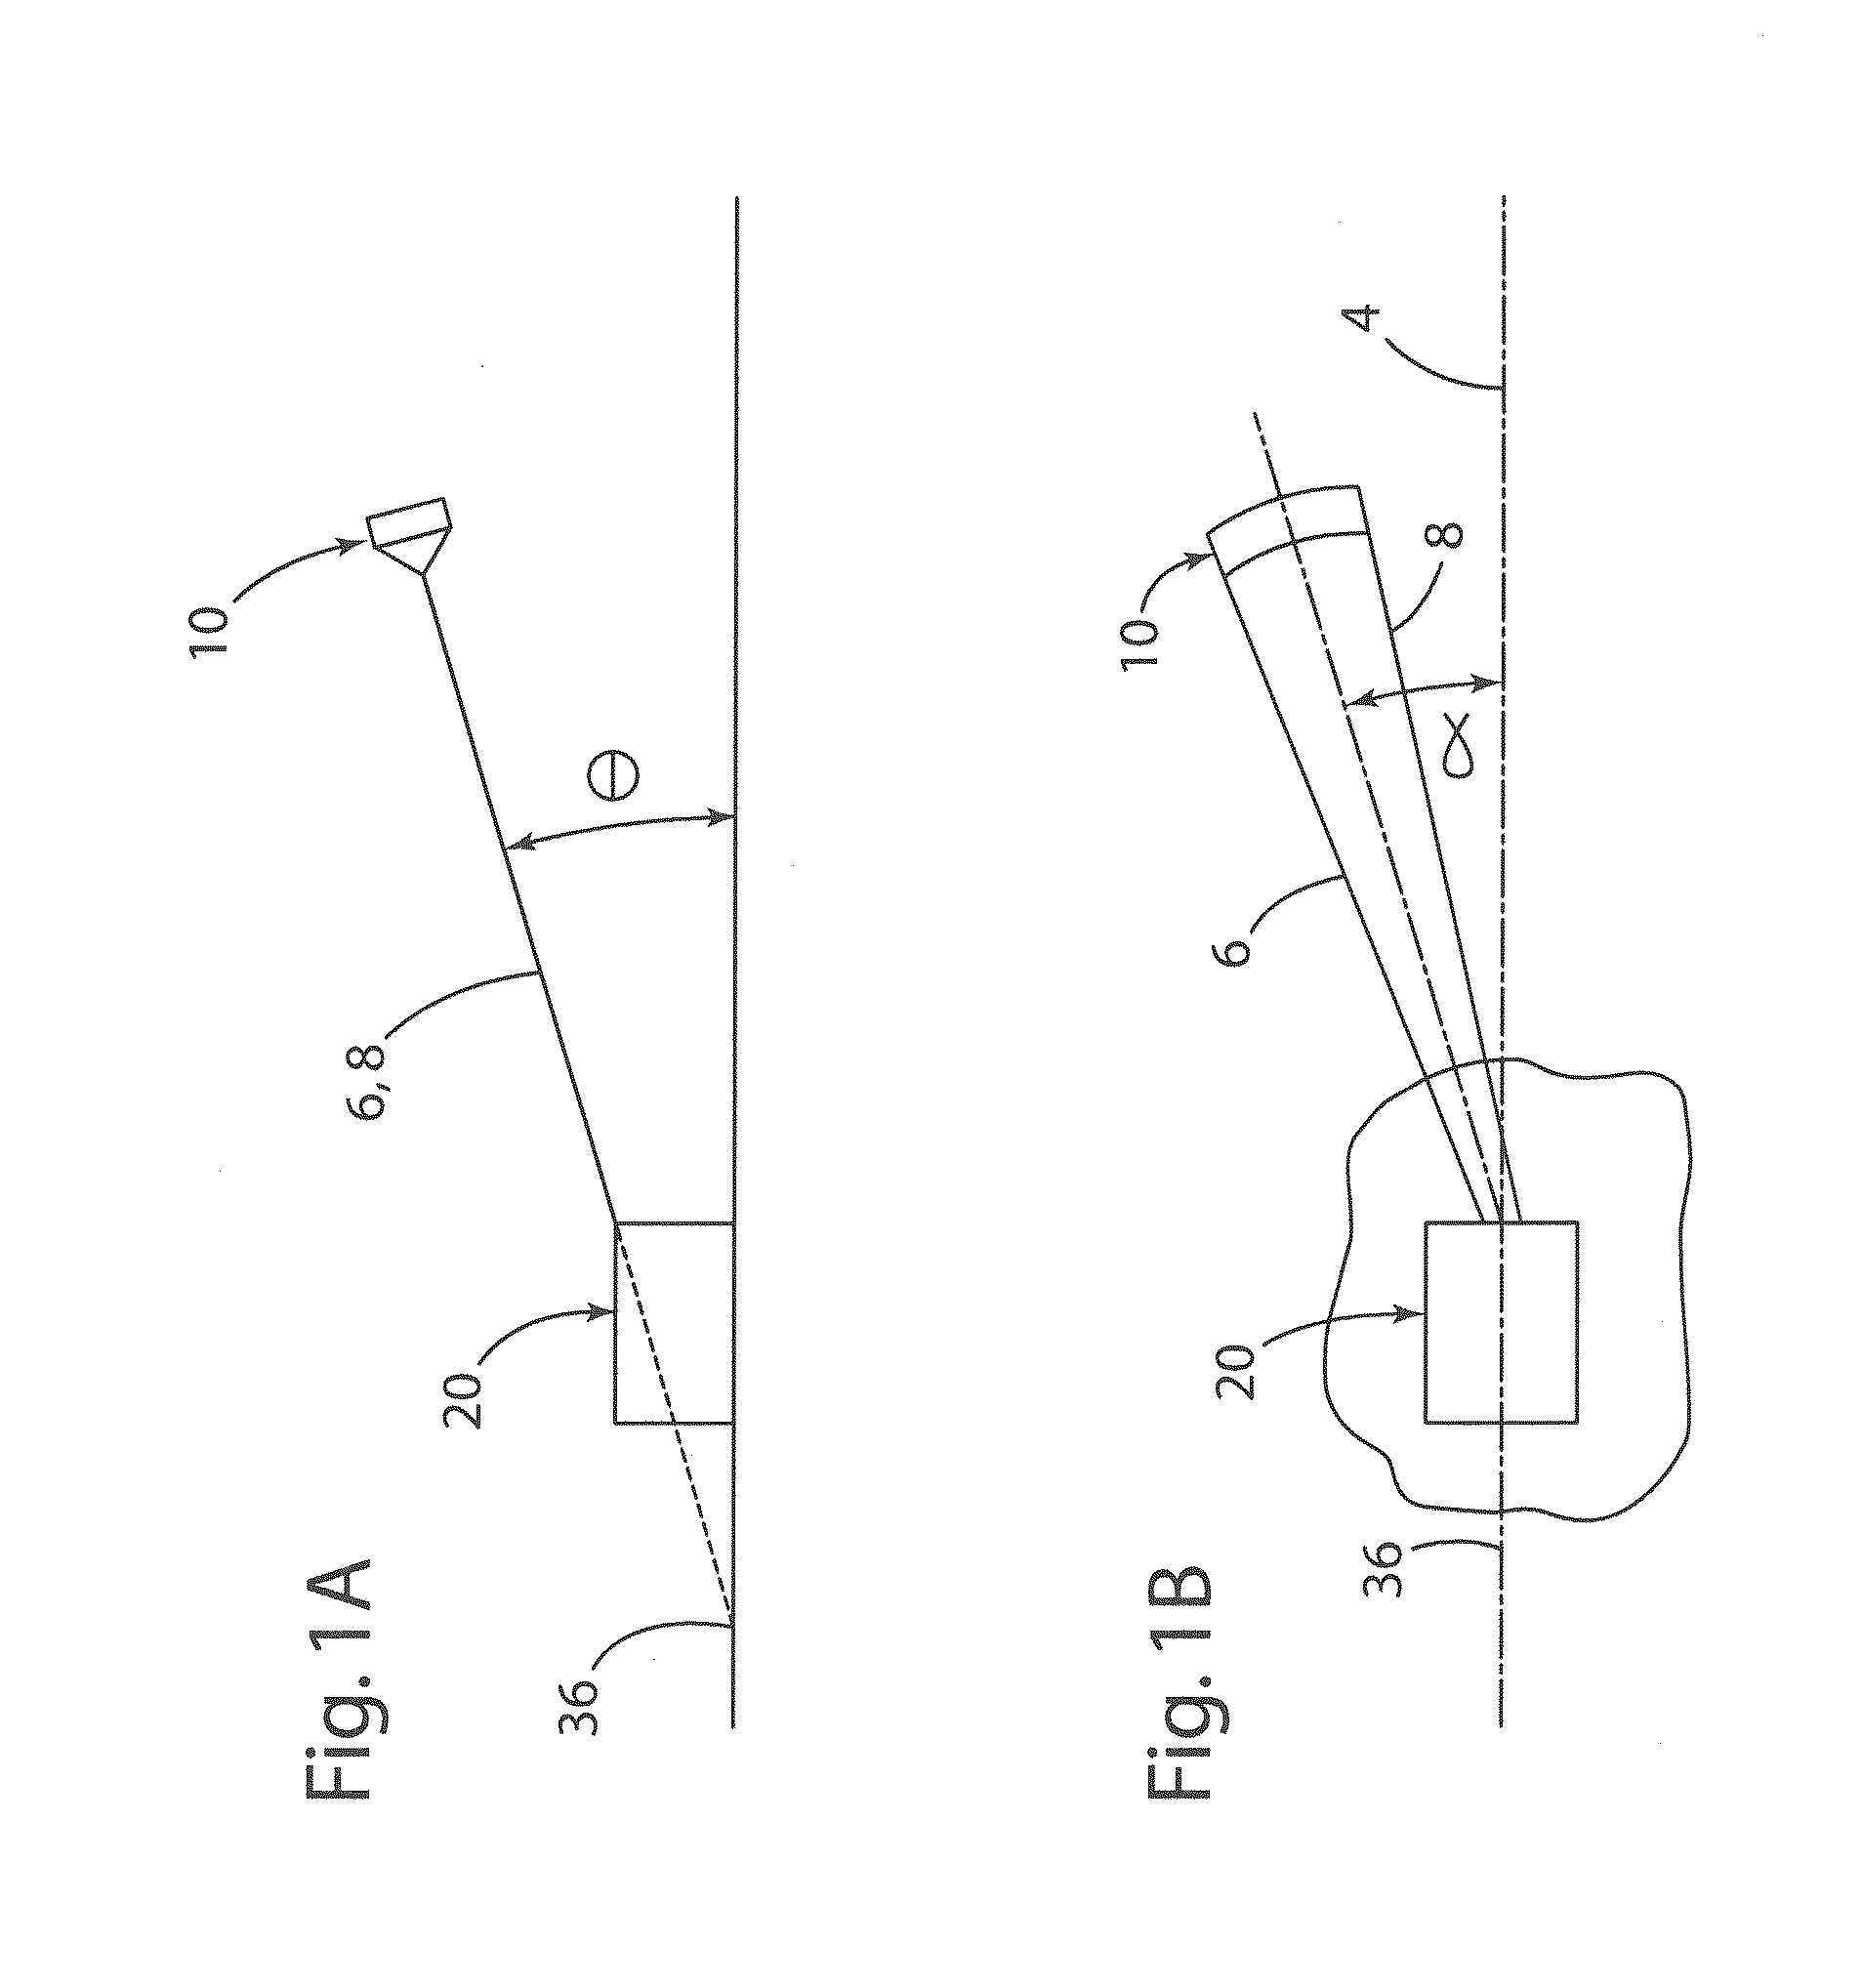 Tethered Vehicle Control and Tracking System